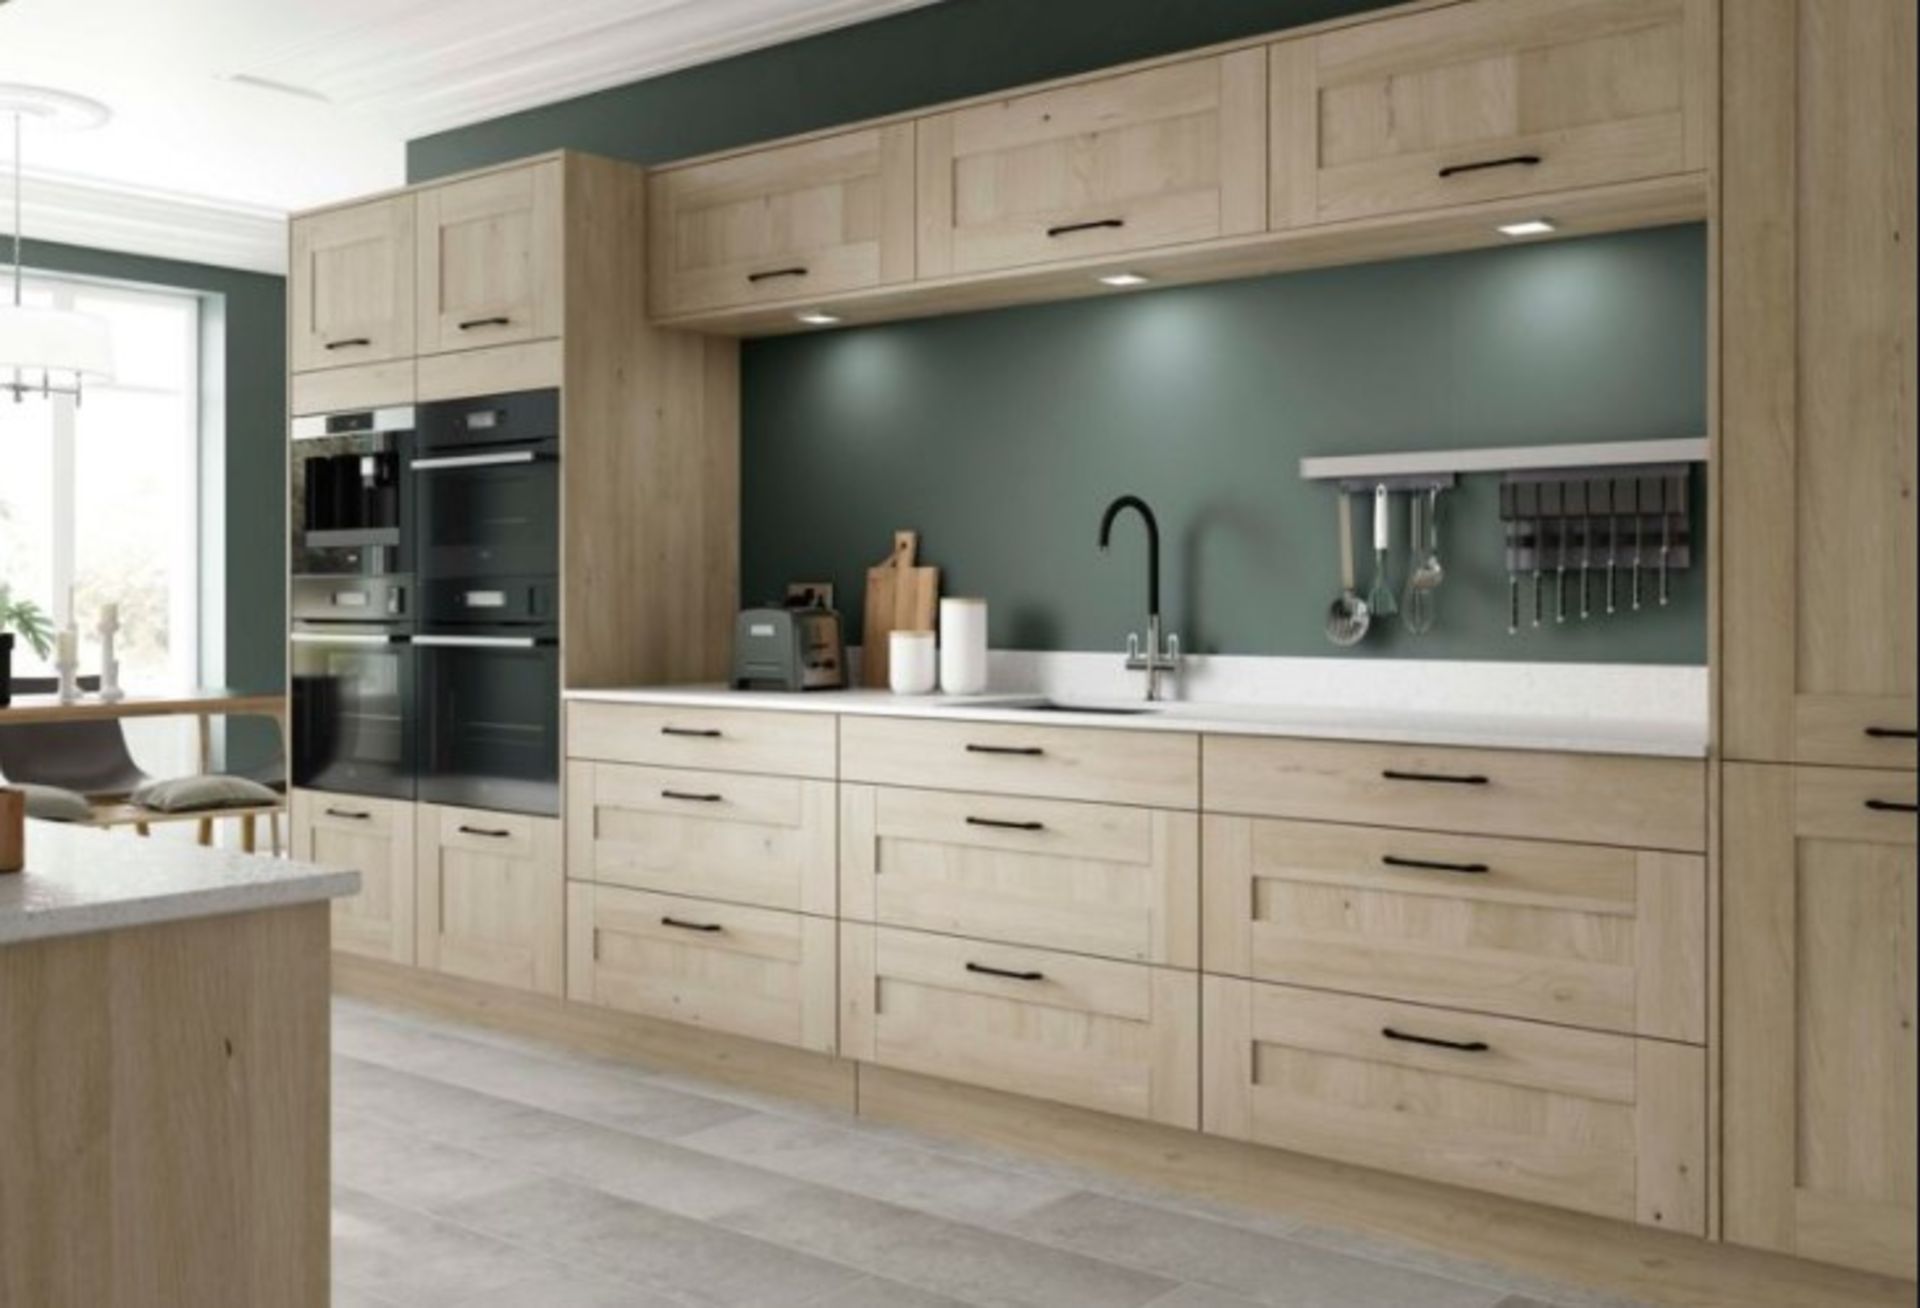 Tiverton solid oak kitchen Range, approx. 7138 items including doors drawers inc curved doors, - Image 10 of 11